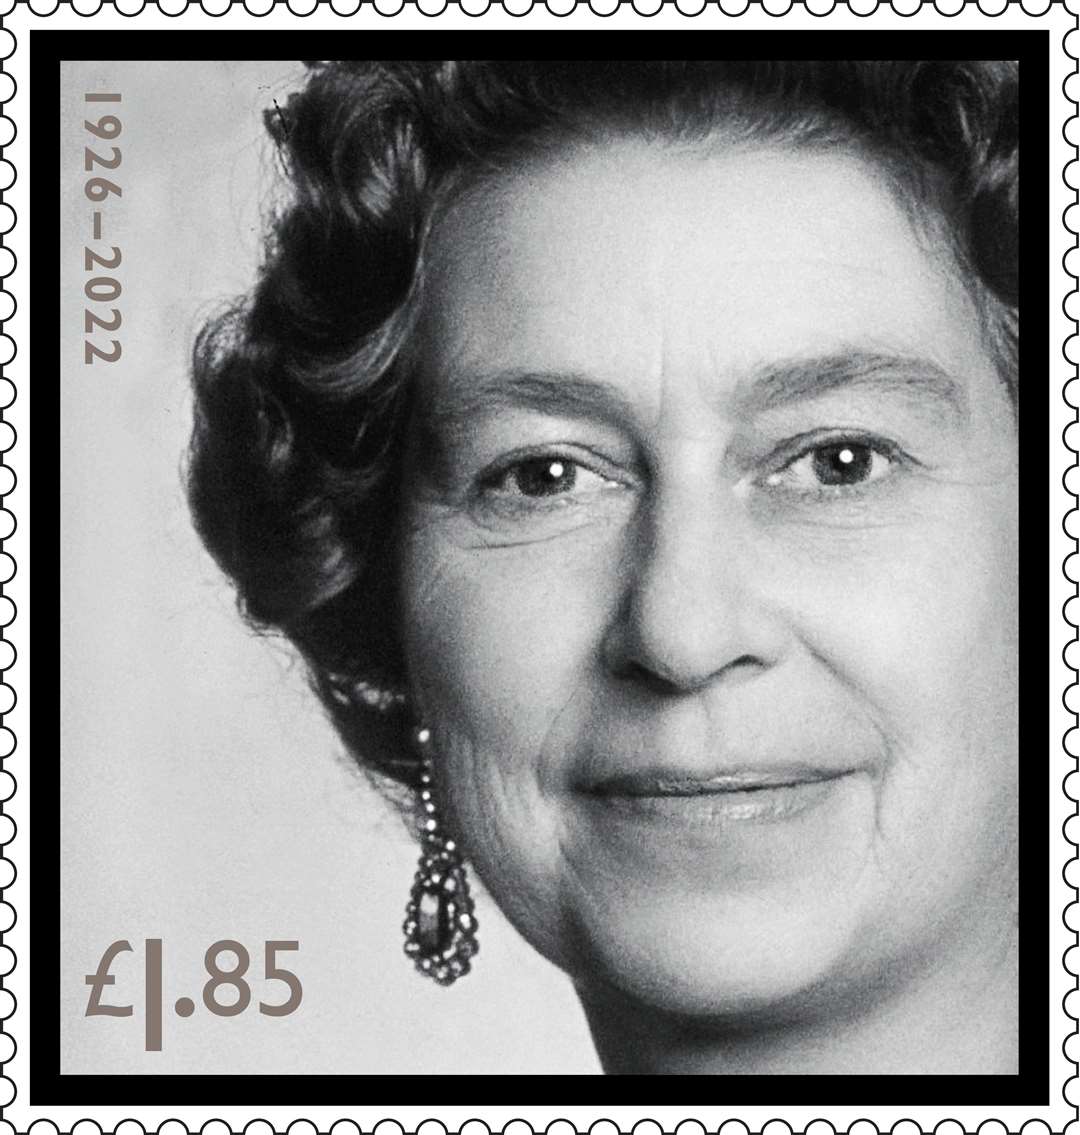 This portrait of HM The Queen was taken in November 1984. Image: Royal Mail.